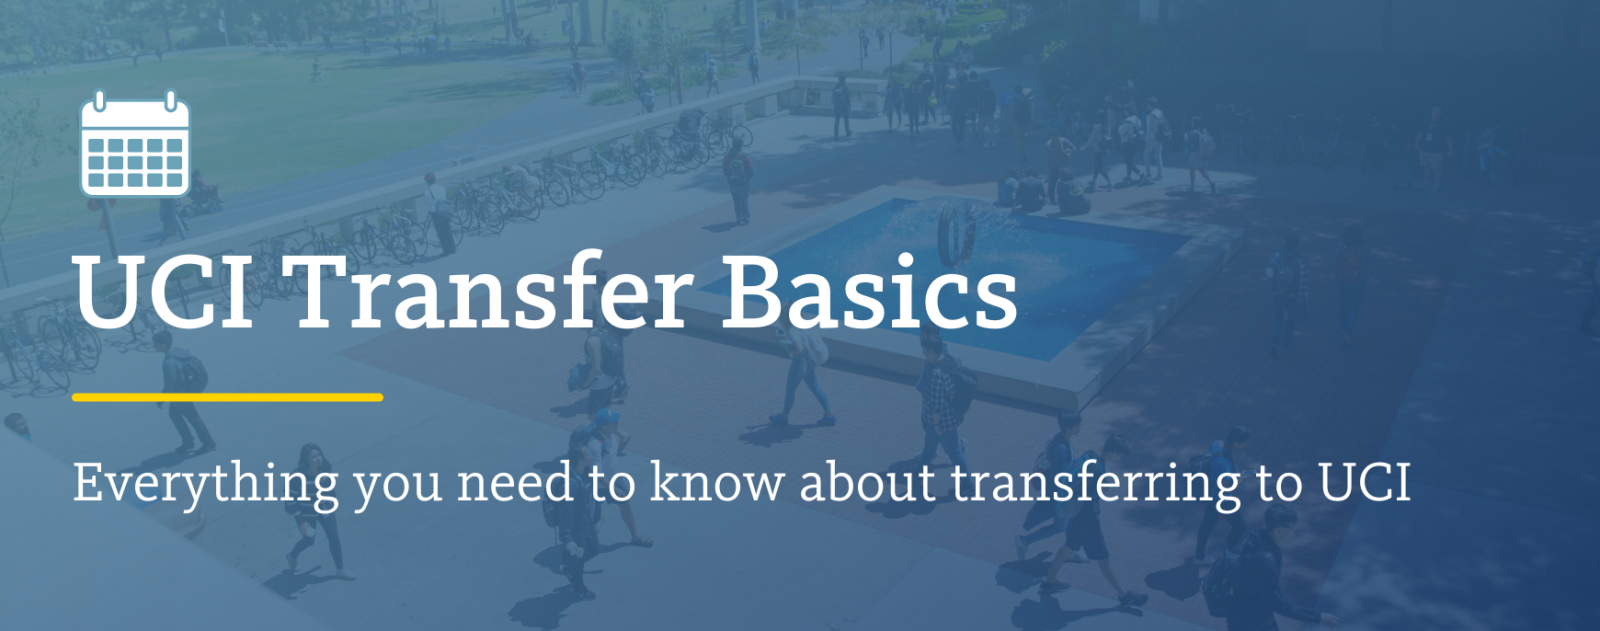 UCI Virtual Events for Transfers